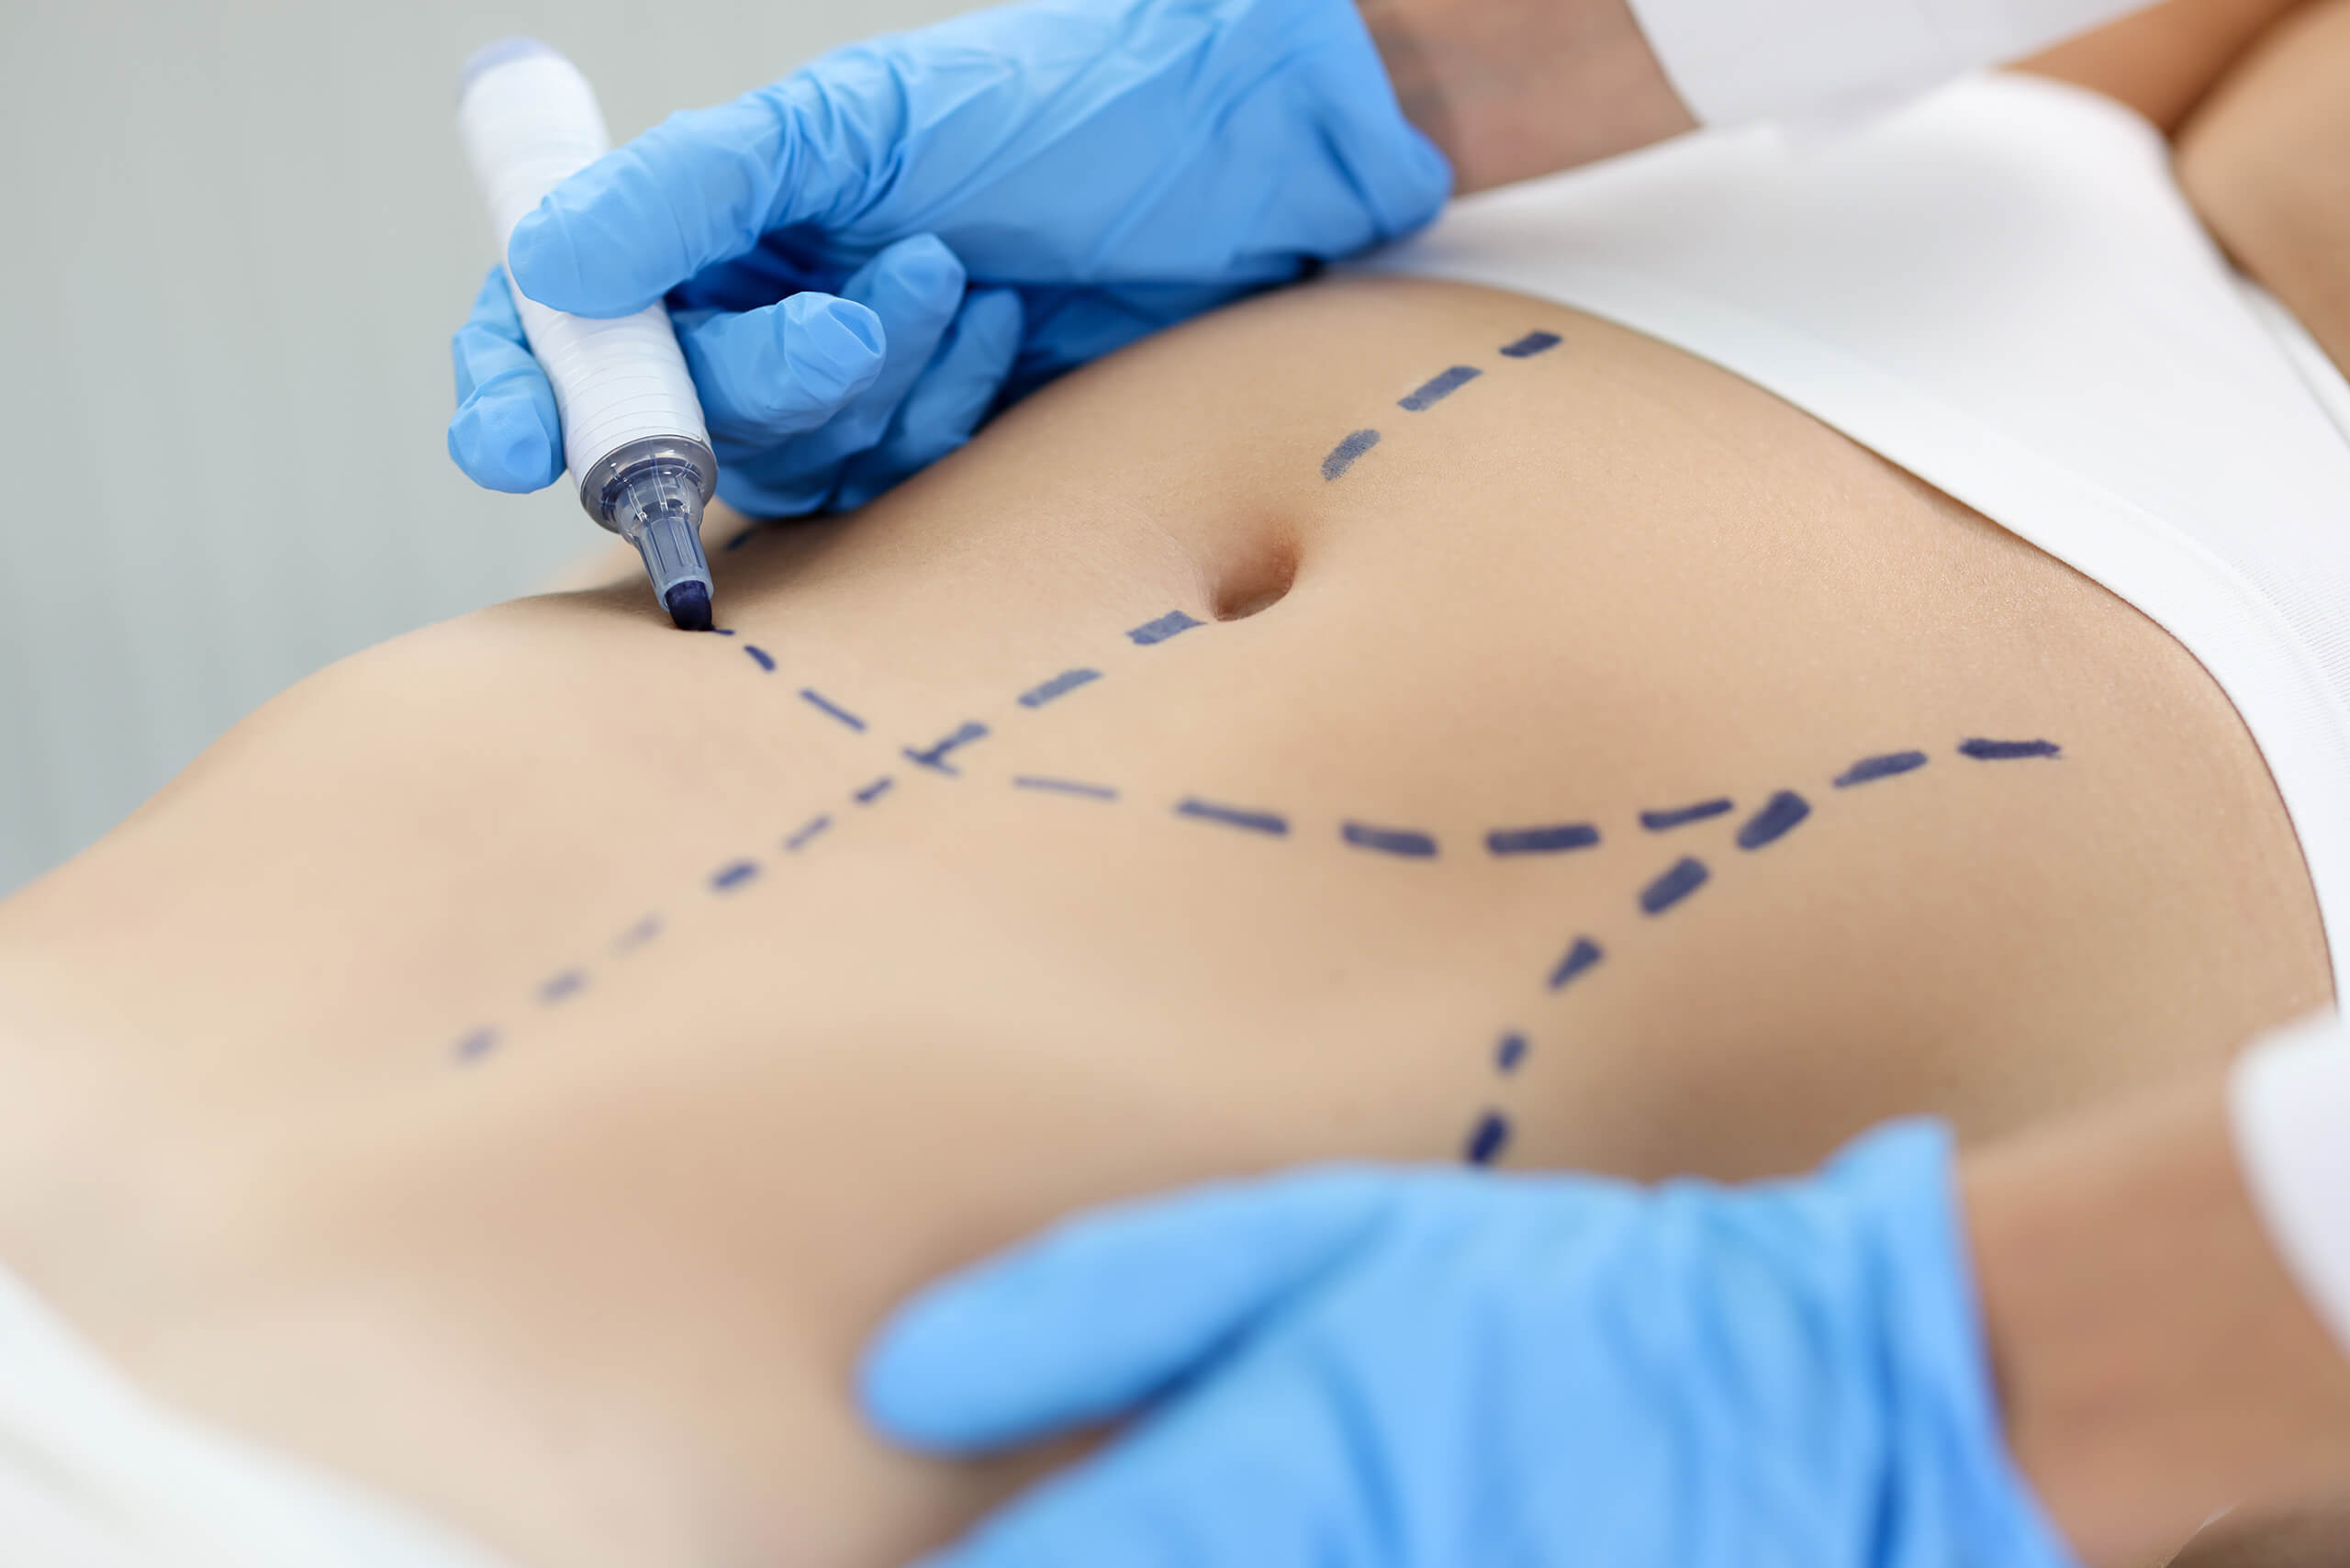 A surgeon marks a patient's abdomen prior to an abdominoplasty, more commonly known as a tummy tuck.